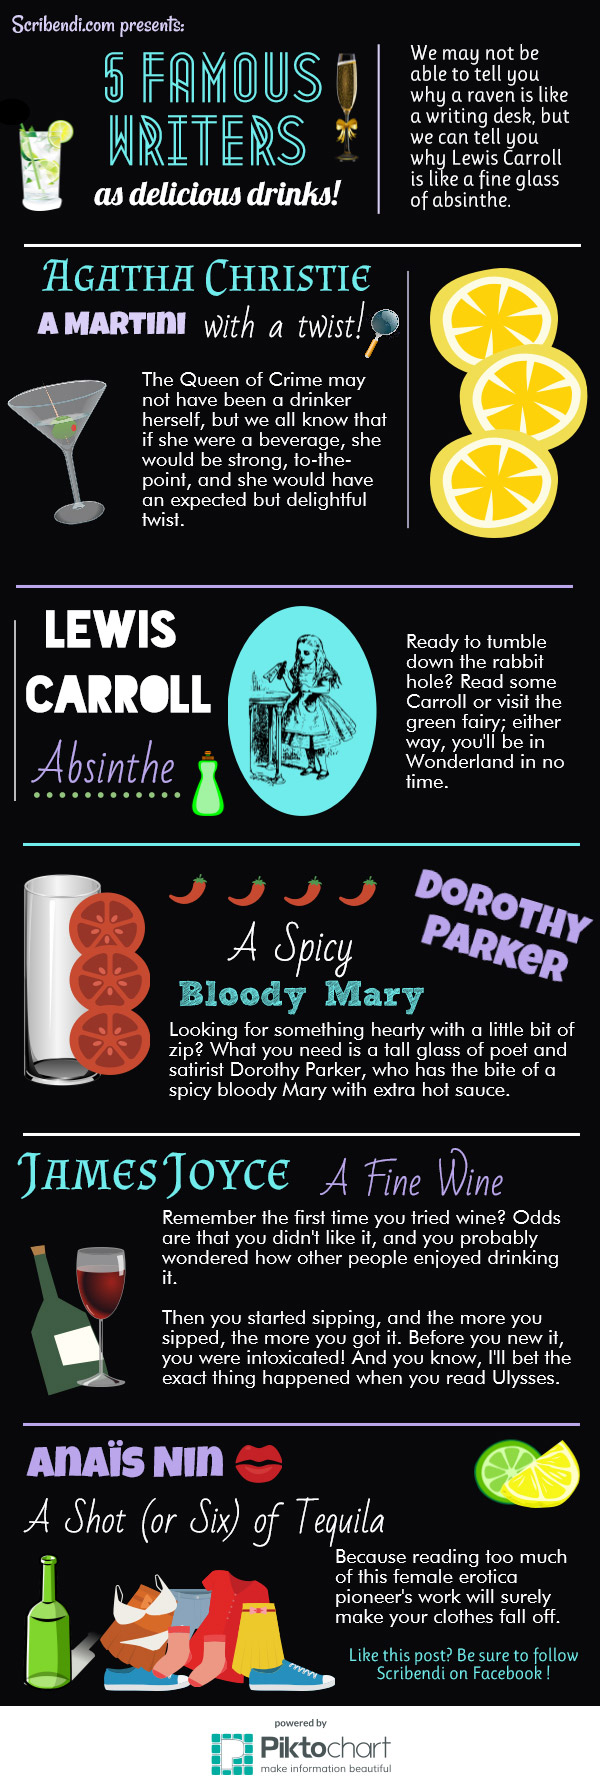 5 Famous Writers as Delicious Drinks